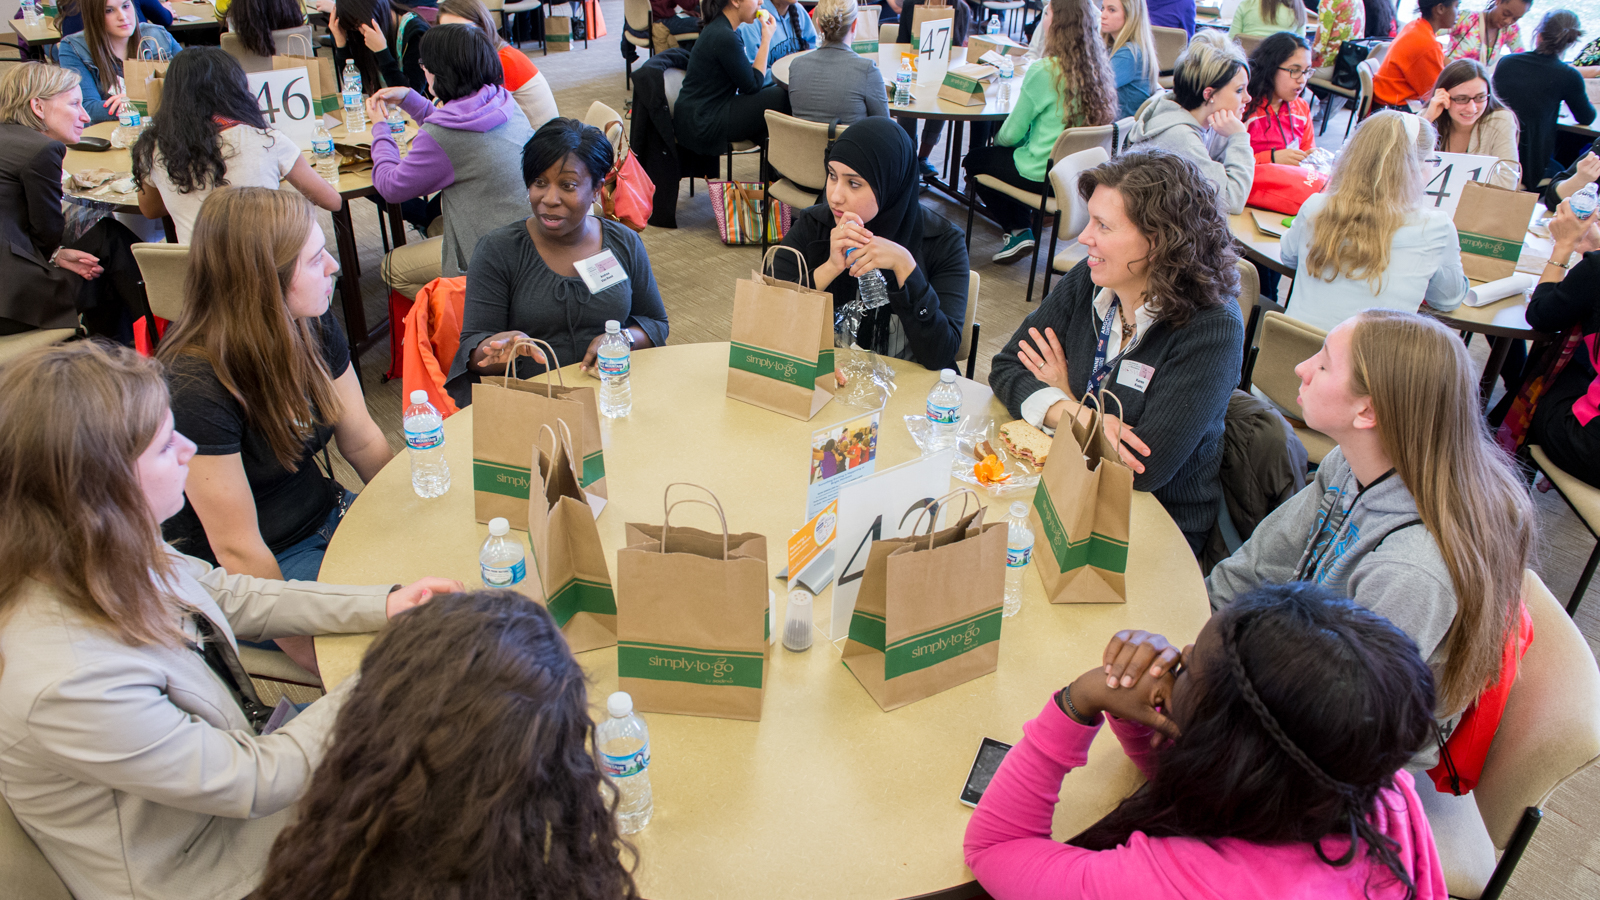 Argonne's Andrea Viel (center left) discusses science and tech career options with high school girls at a roundtable during Argonne's 27th annual Science Careers in Search of Women conference last year.